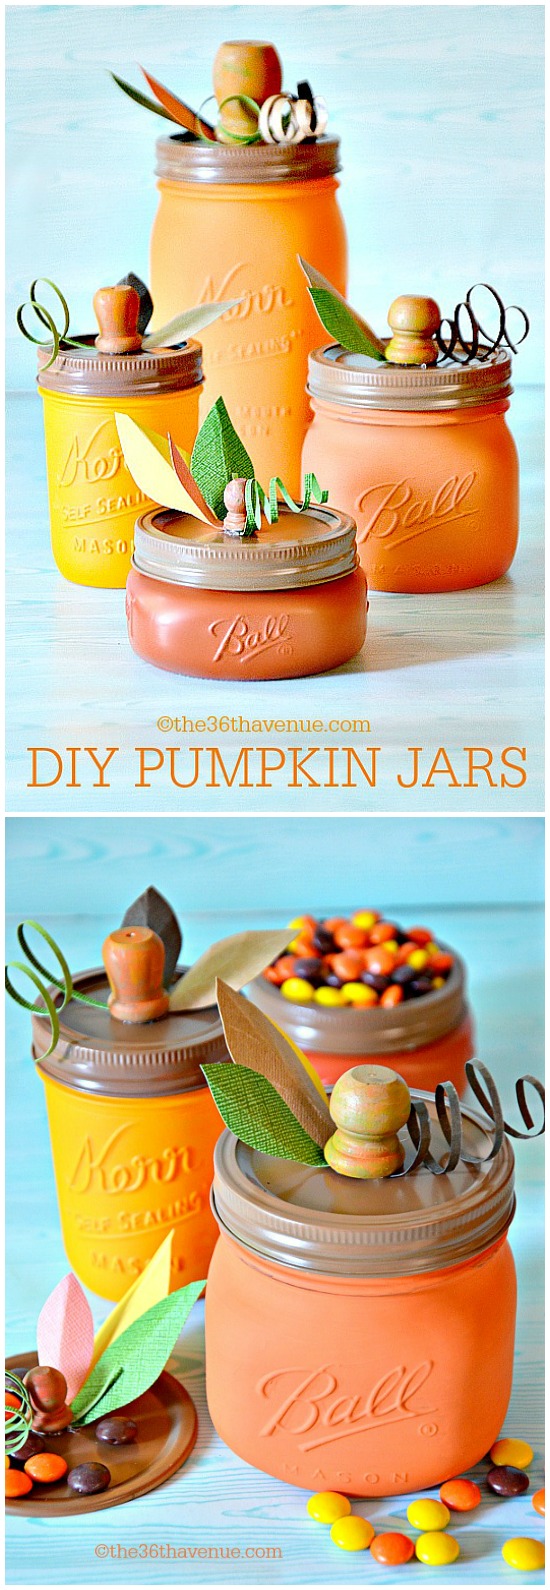 Crafts : DIY Pumpkin Jar Tutorial by the36thavenue.com Super cute and easy to make! 